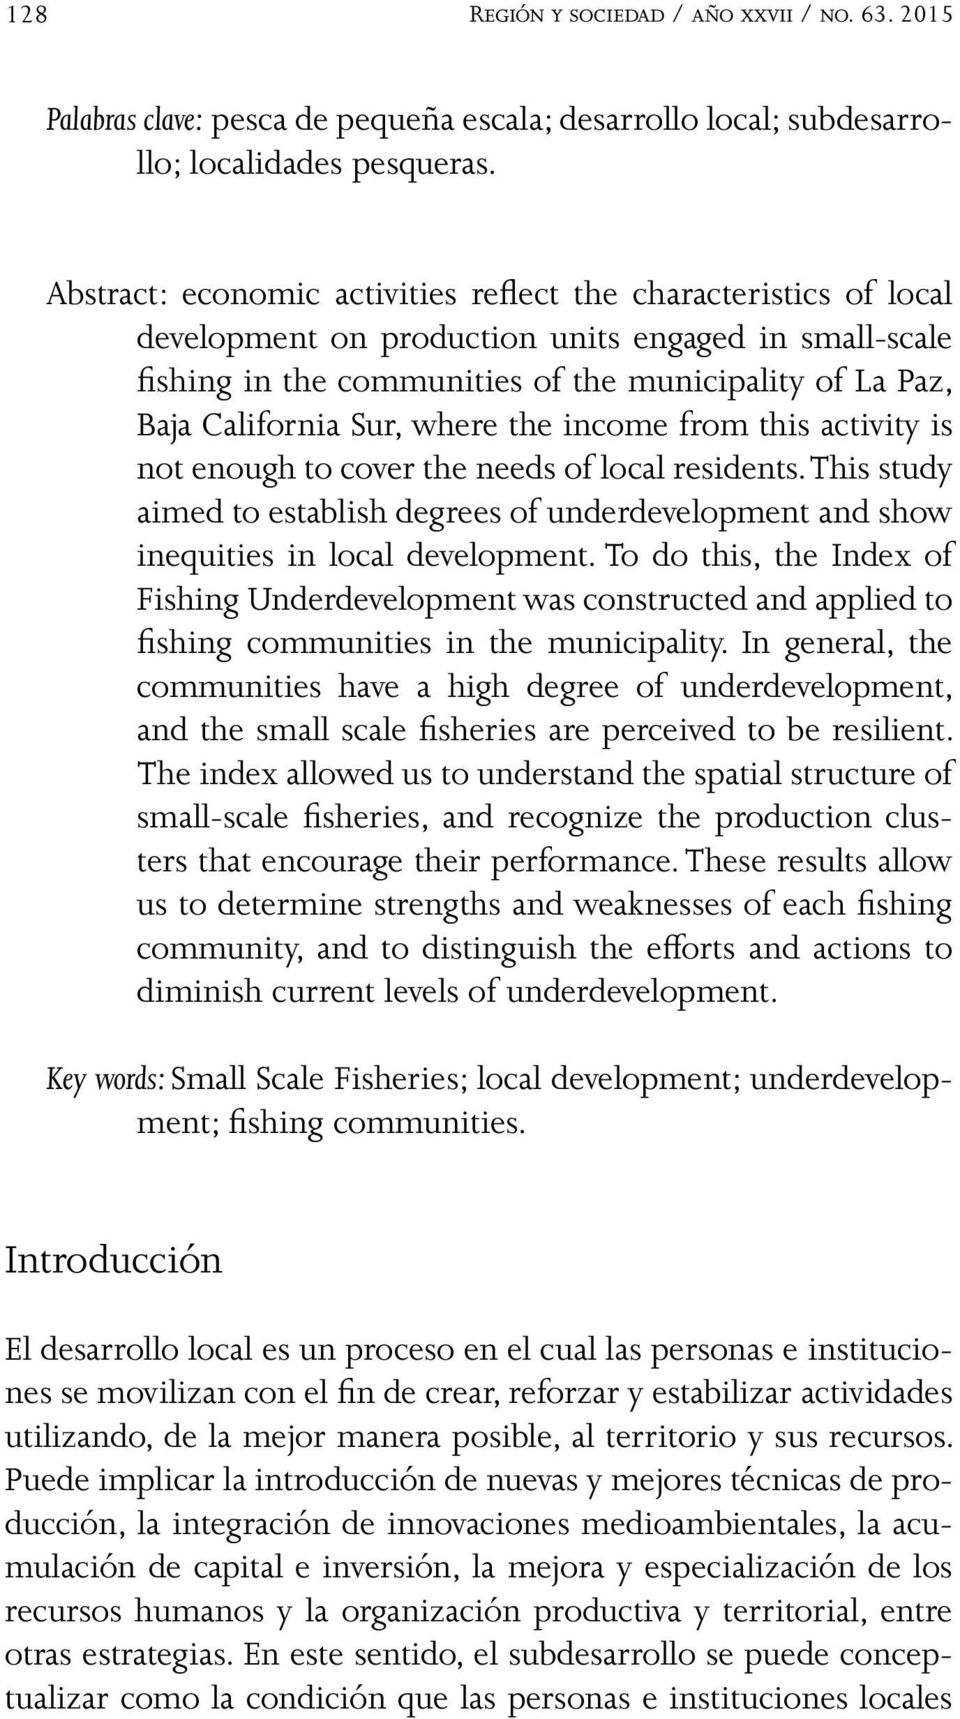 Sur, where the income from this activity is not enough to cover the needs of local residents. This study aimed to establish degrees of underdevelopment and show inequities in local development.